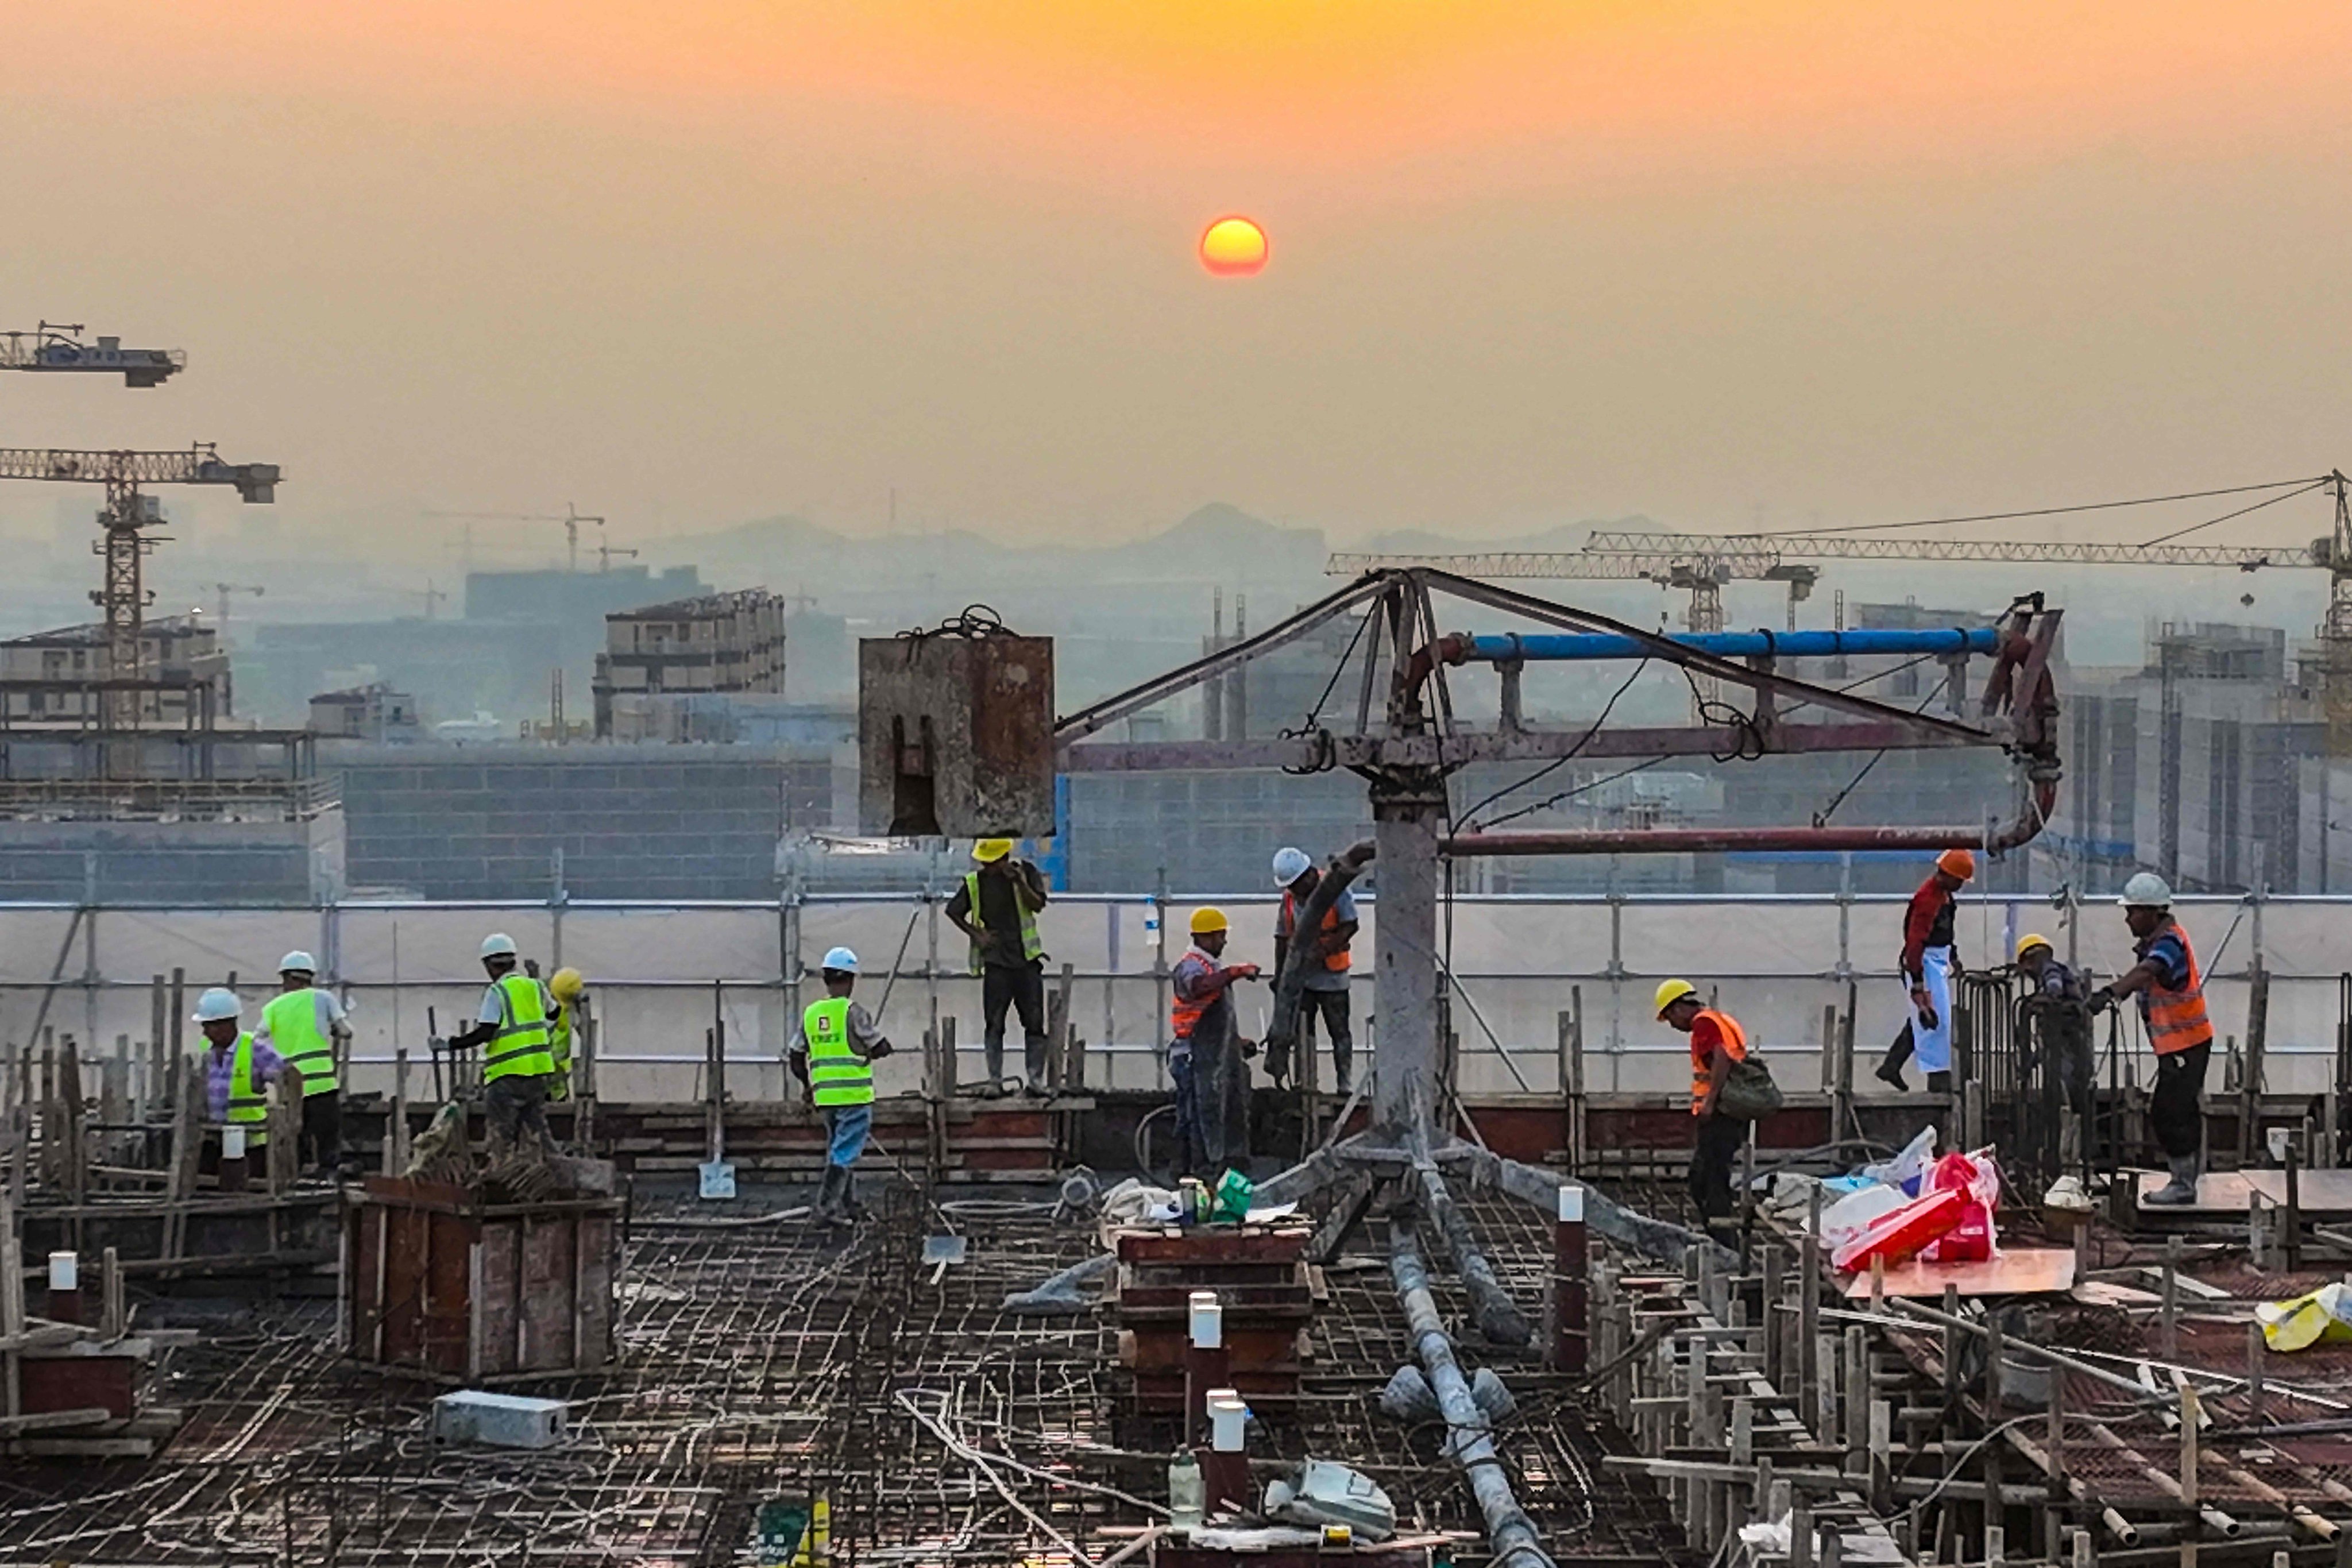 Workers are seen at a housing project construction site in Ningbo, in China’s Zhejiang province, on September 17. The persistent issues in China’s property sector call for for bold reforms from the central government in the face of global headwinds and resistance from interest groups. Photo: AFP 